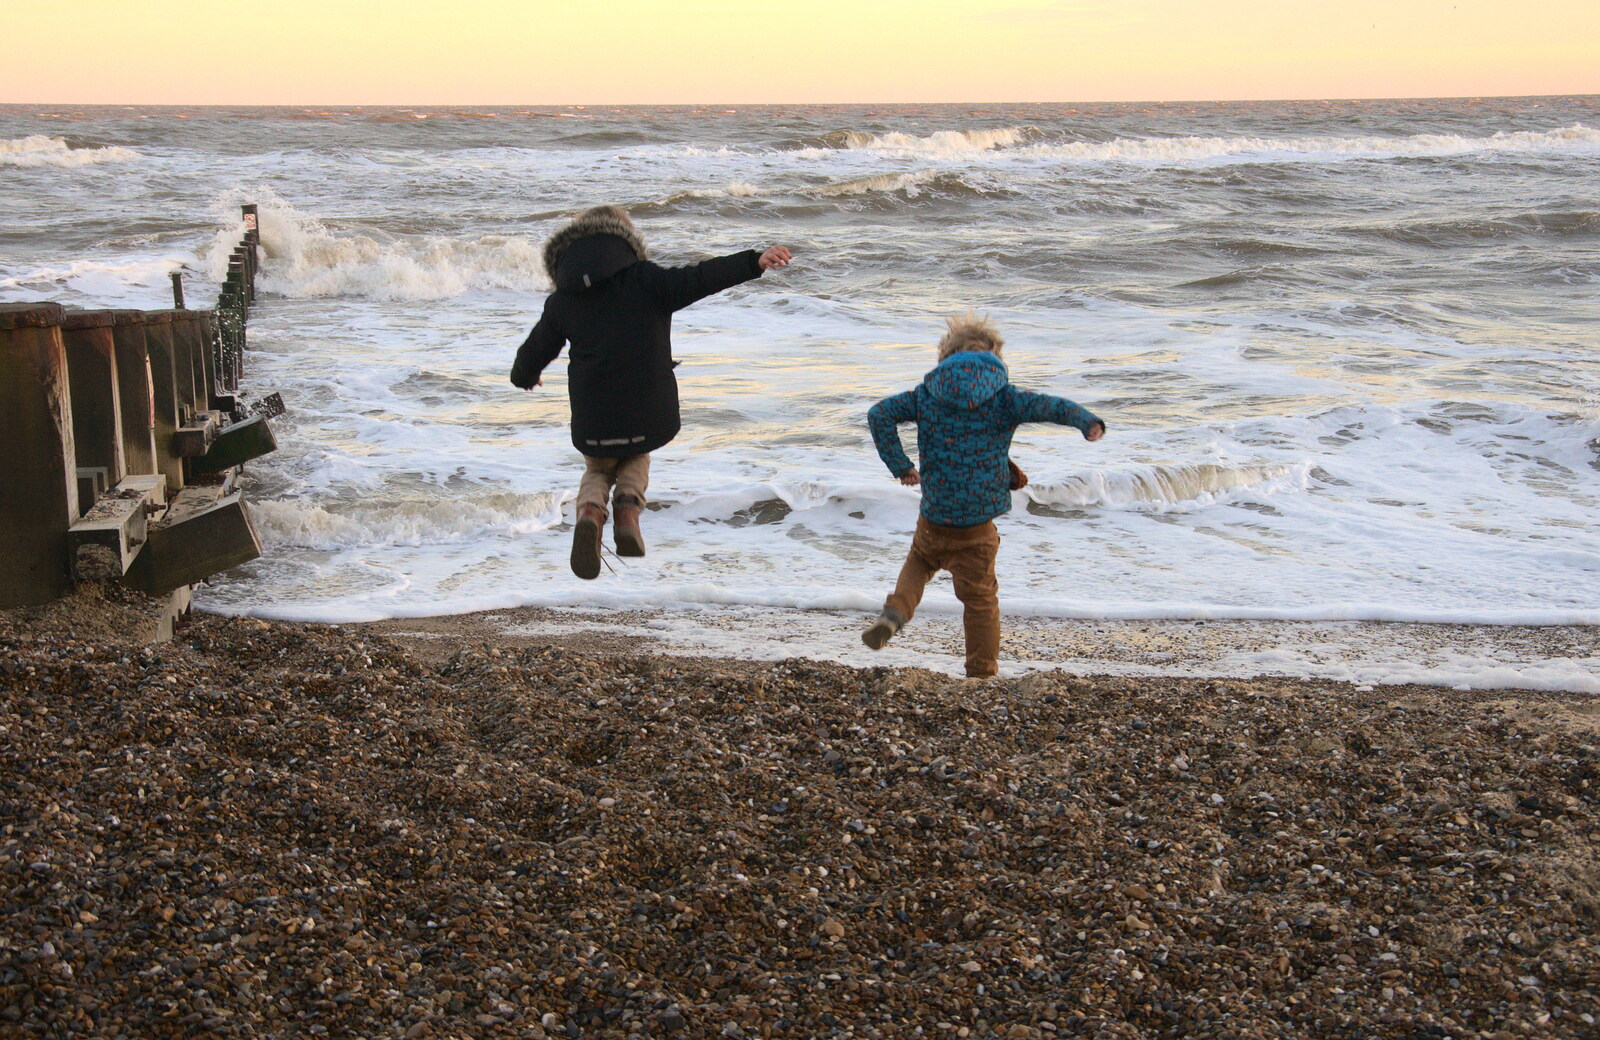 The boys leap around from Sunset at the Beach, Southwold, Suffolk - 18th November 2018